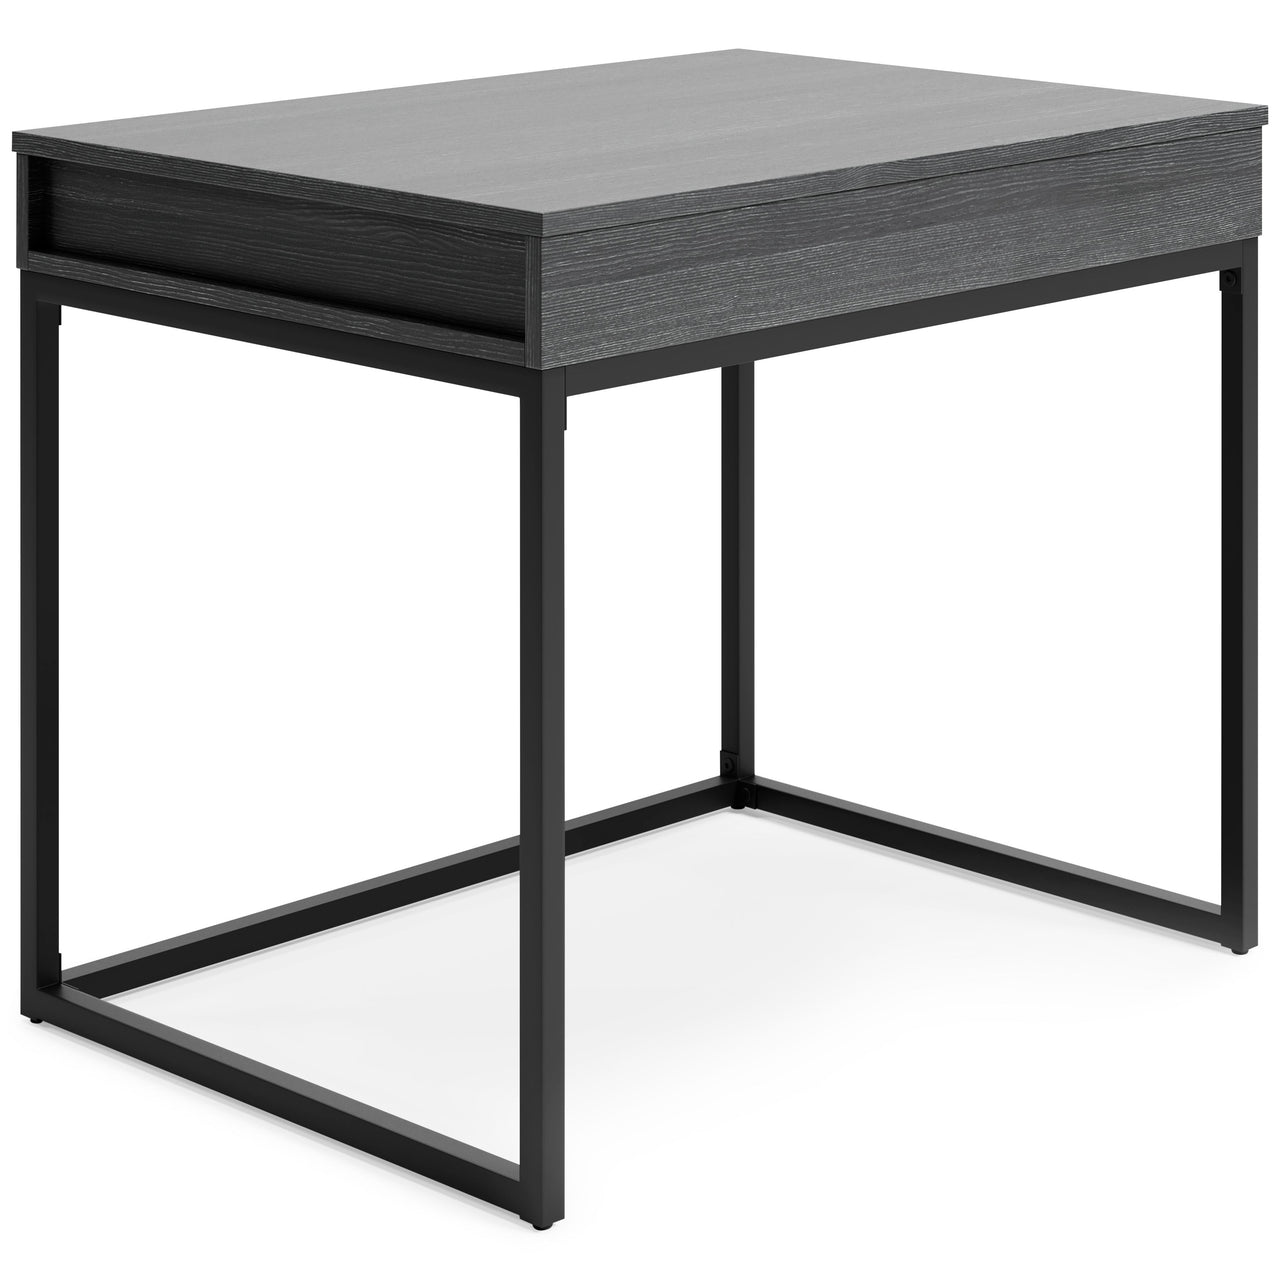 Yarlow - Black - Home Office Lift Top Desk Tony's Home Furnishings Furniture. Beds. Dressers. Sofas.